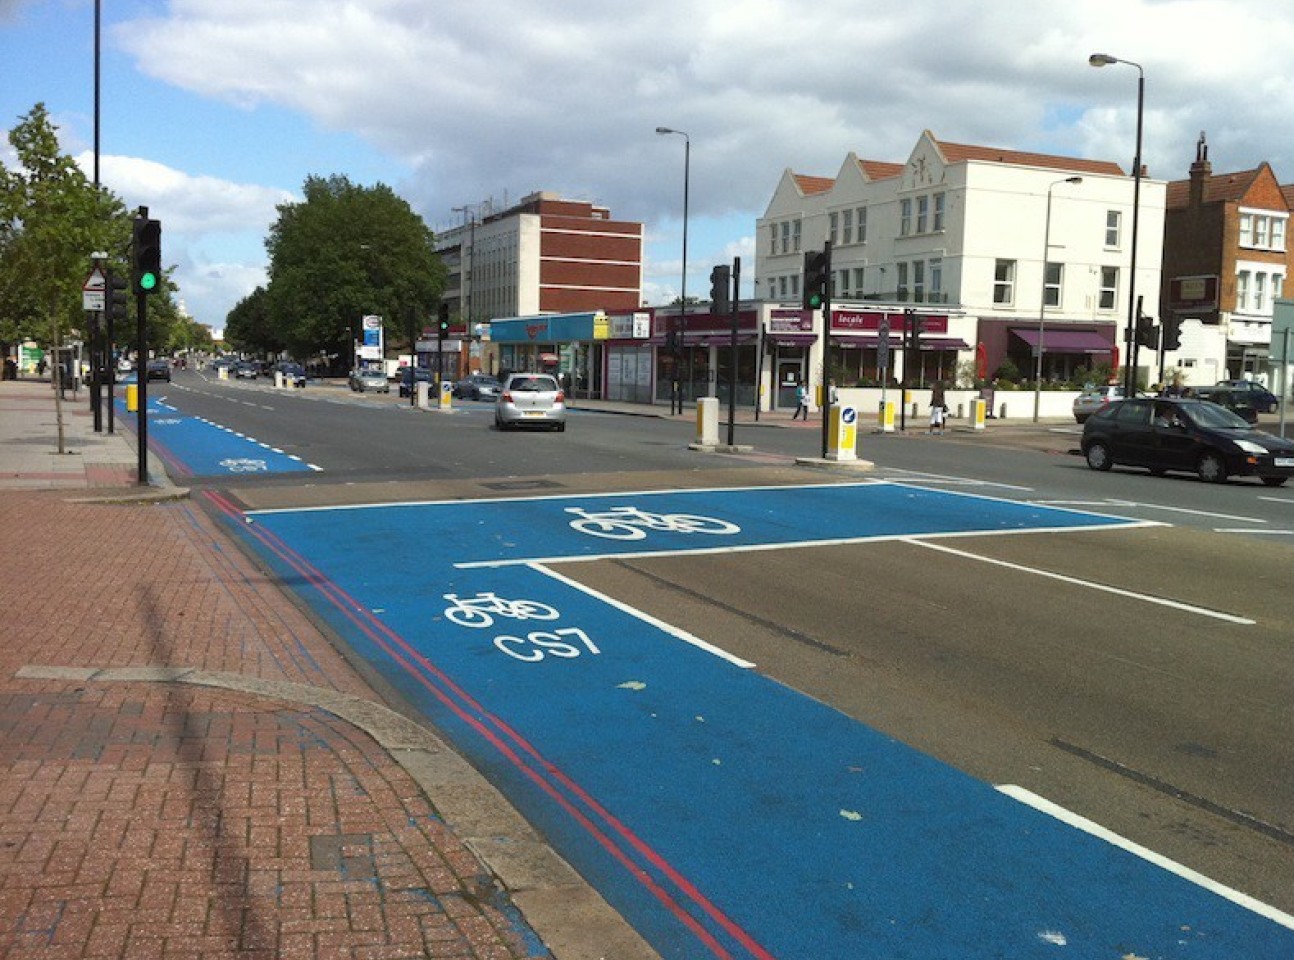 Cycle lane in blue along a main road